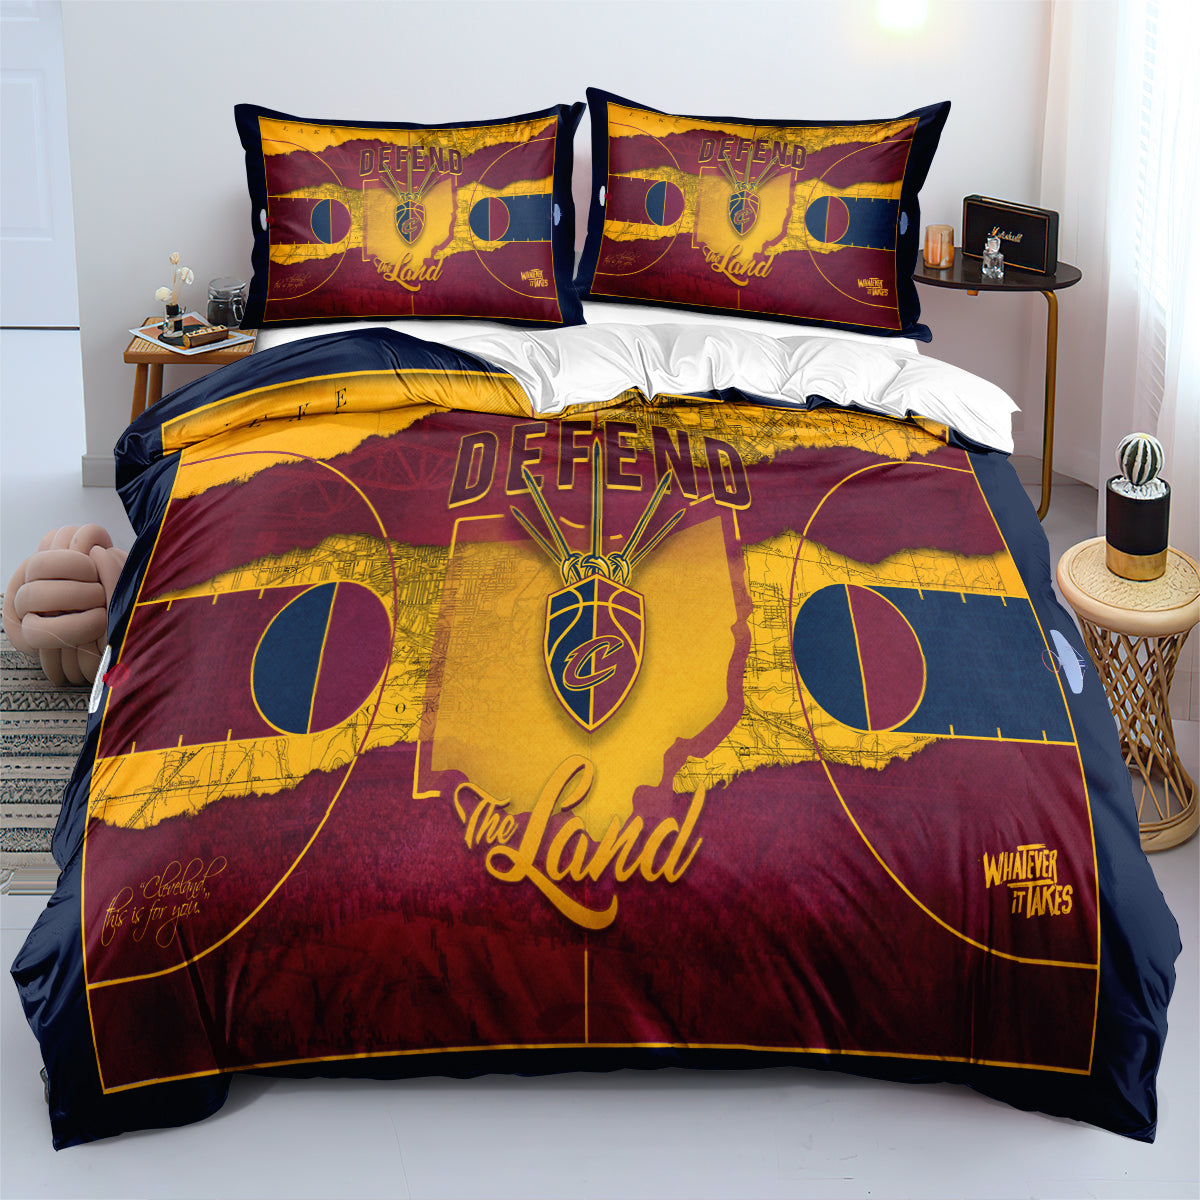 Cleveland Cavaliers Bedding Set Quilt Cover Without Filler